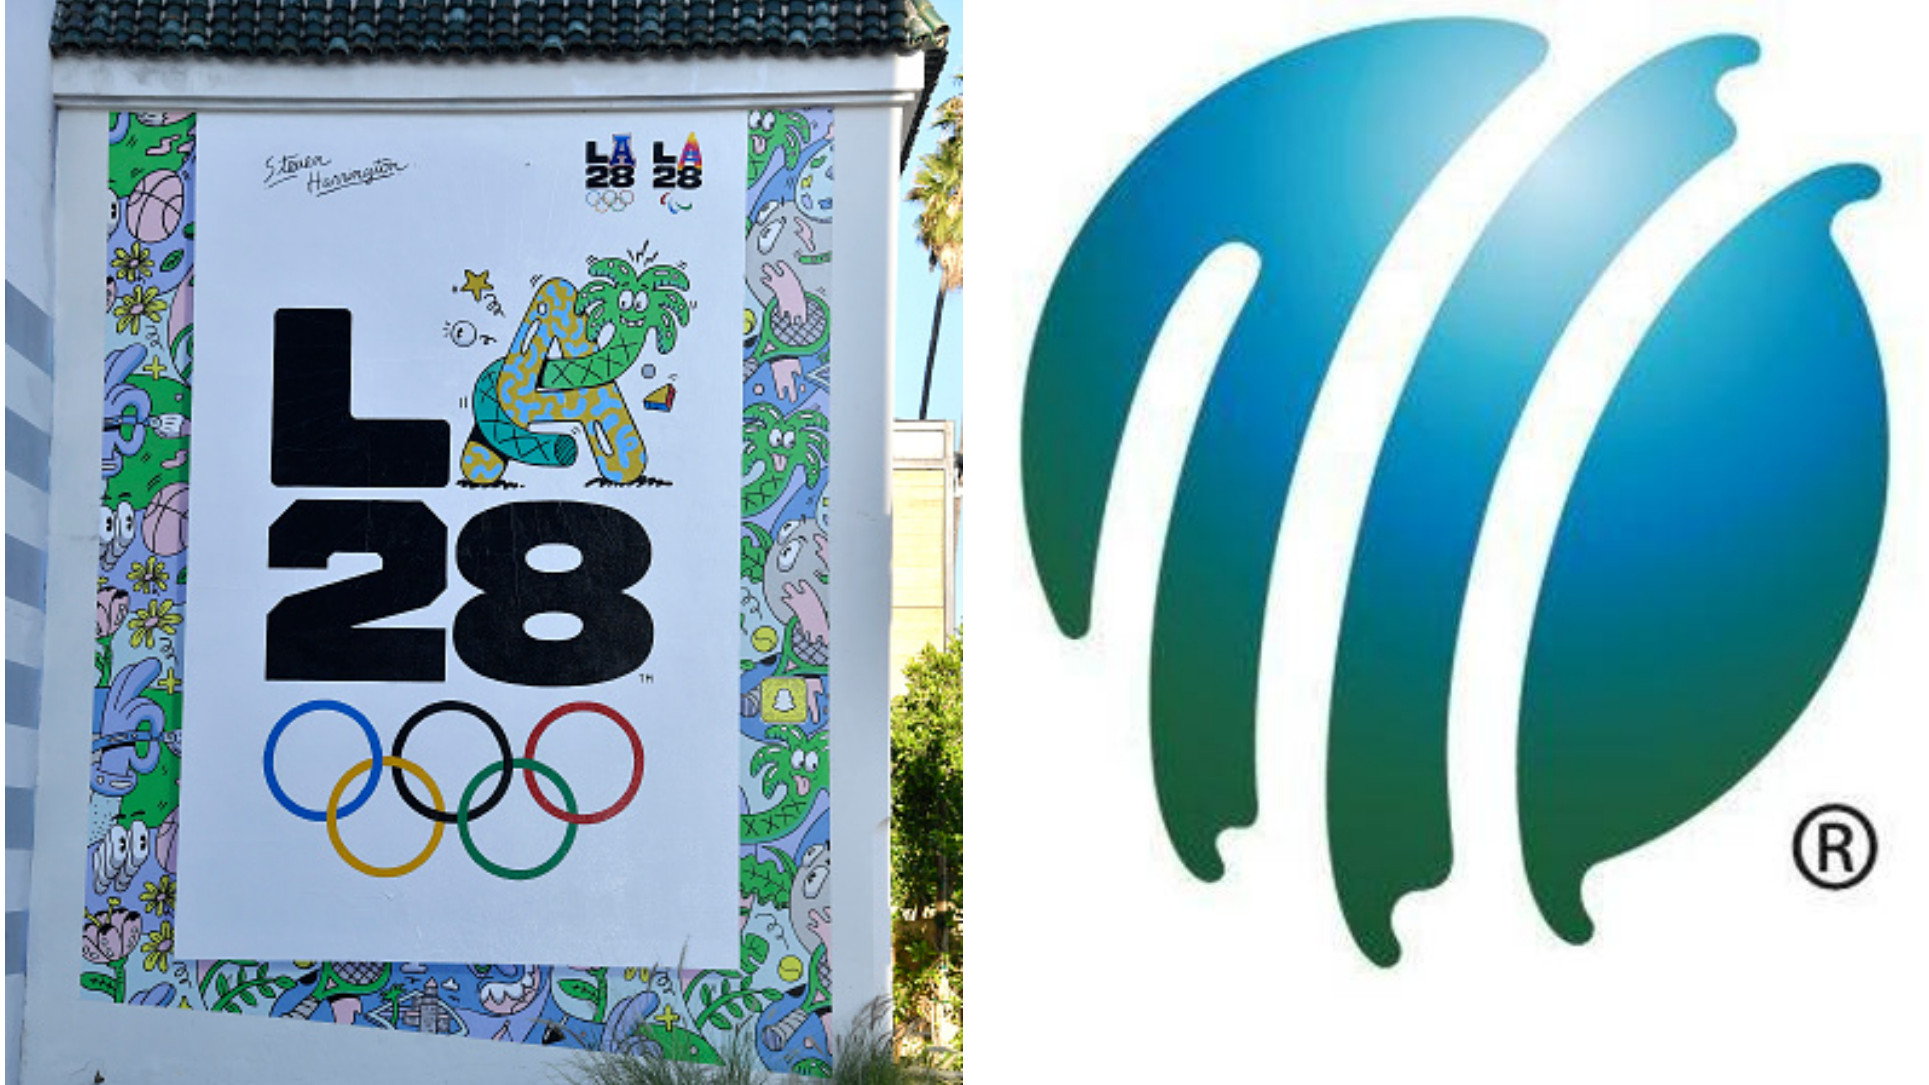 International Olympic Committee to review cricket for inclusion in 2028 Los Angeles Games